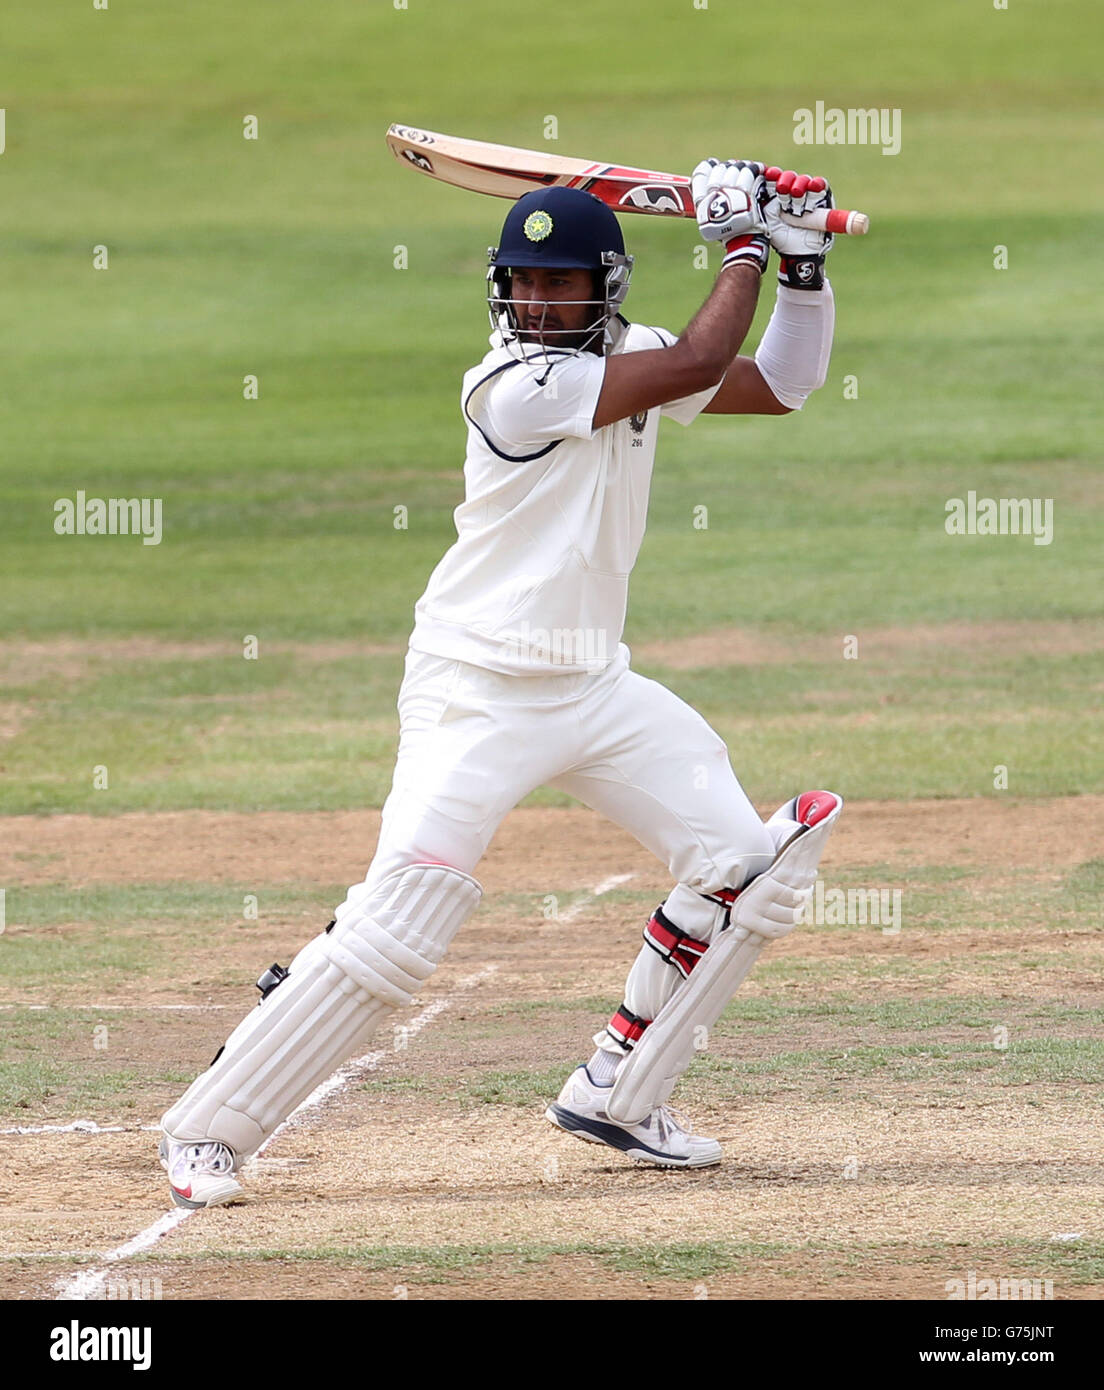 Indians' Cheteshwar Pujara bats during day two of the Internationa warm up match at The 3aaa County Ground, Derby. Stock Photo